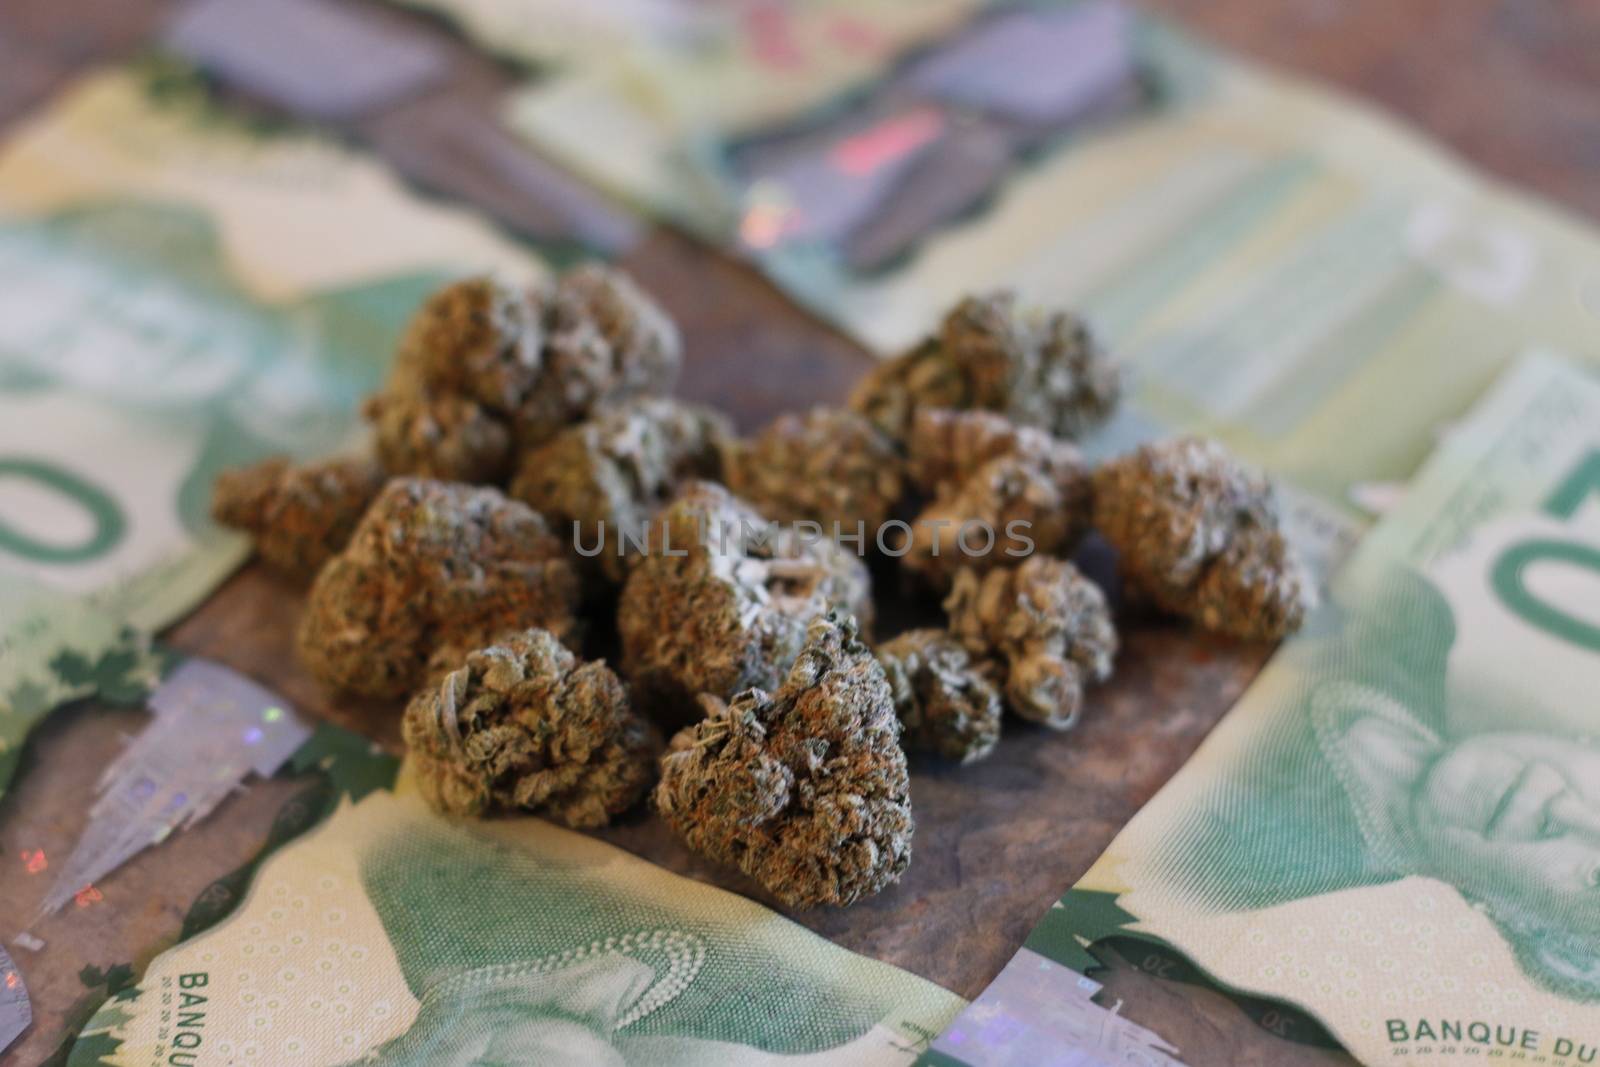 Marijuana and canadian money on a granite counter by mynewturtle1